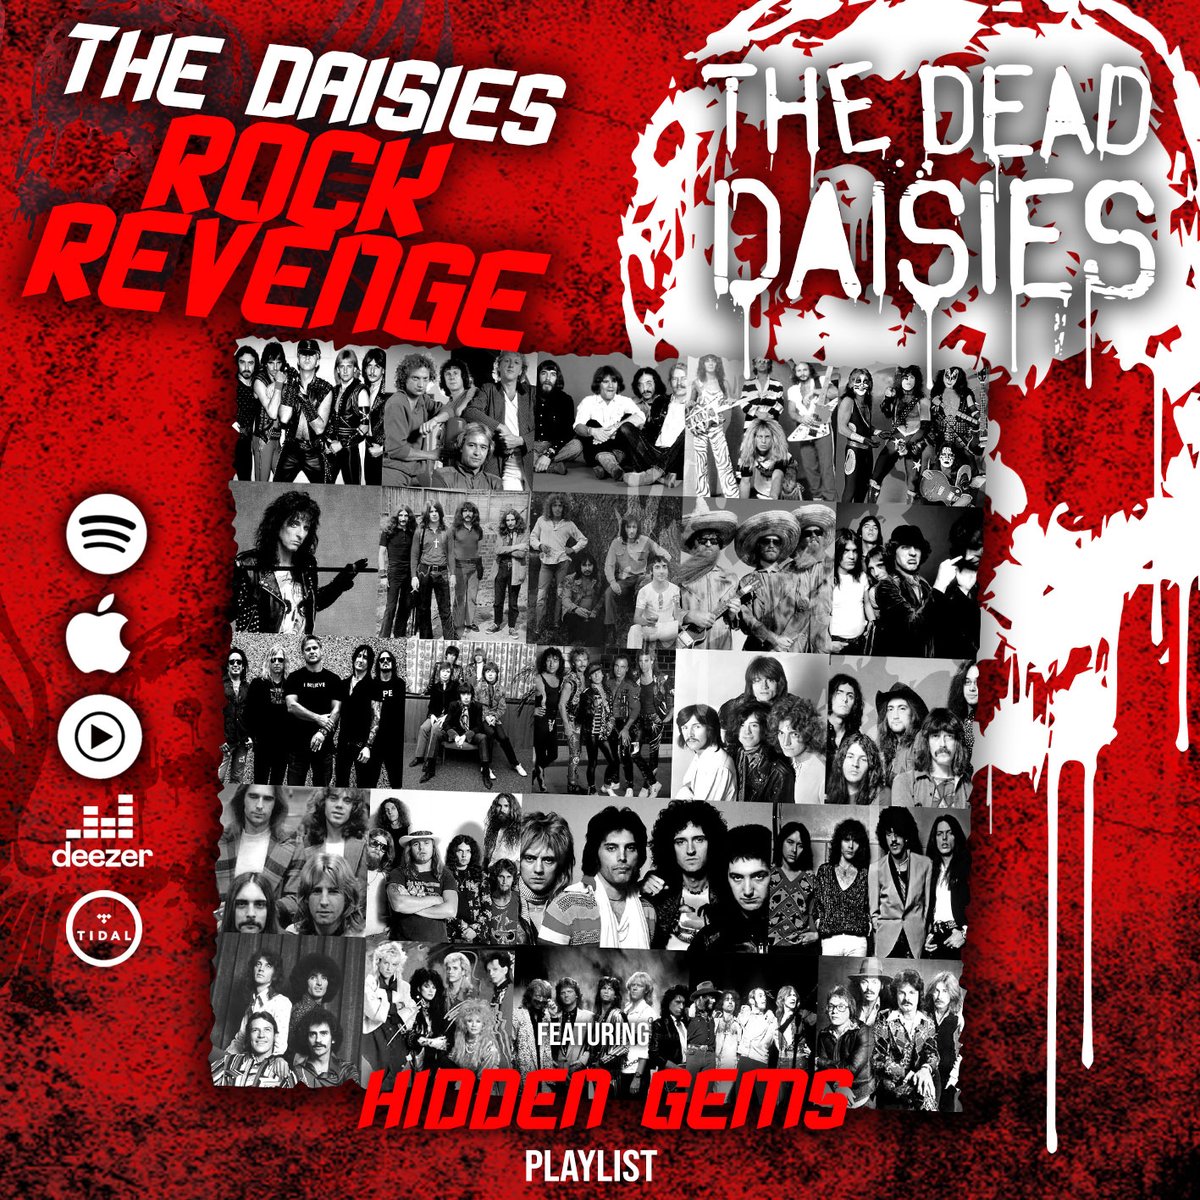 This weekend for your streaming pleasure we’ve pulled together some crowd favourites and hidden gems from some of the world’s greatest rock bands!🚀🚀
Have a good one & turn it up!!😎
thedeaddaisies.com/daisies-rock-r…

#TheDeadDaisies #TheDaisiesRockRevenge #HiddenGems #Playlist #Spotify